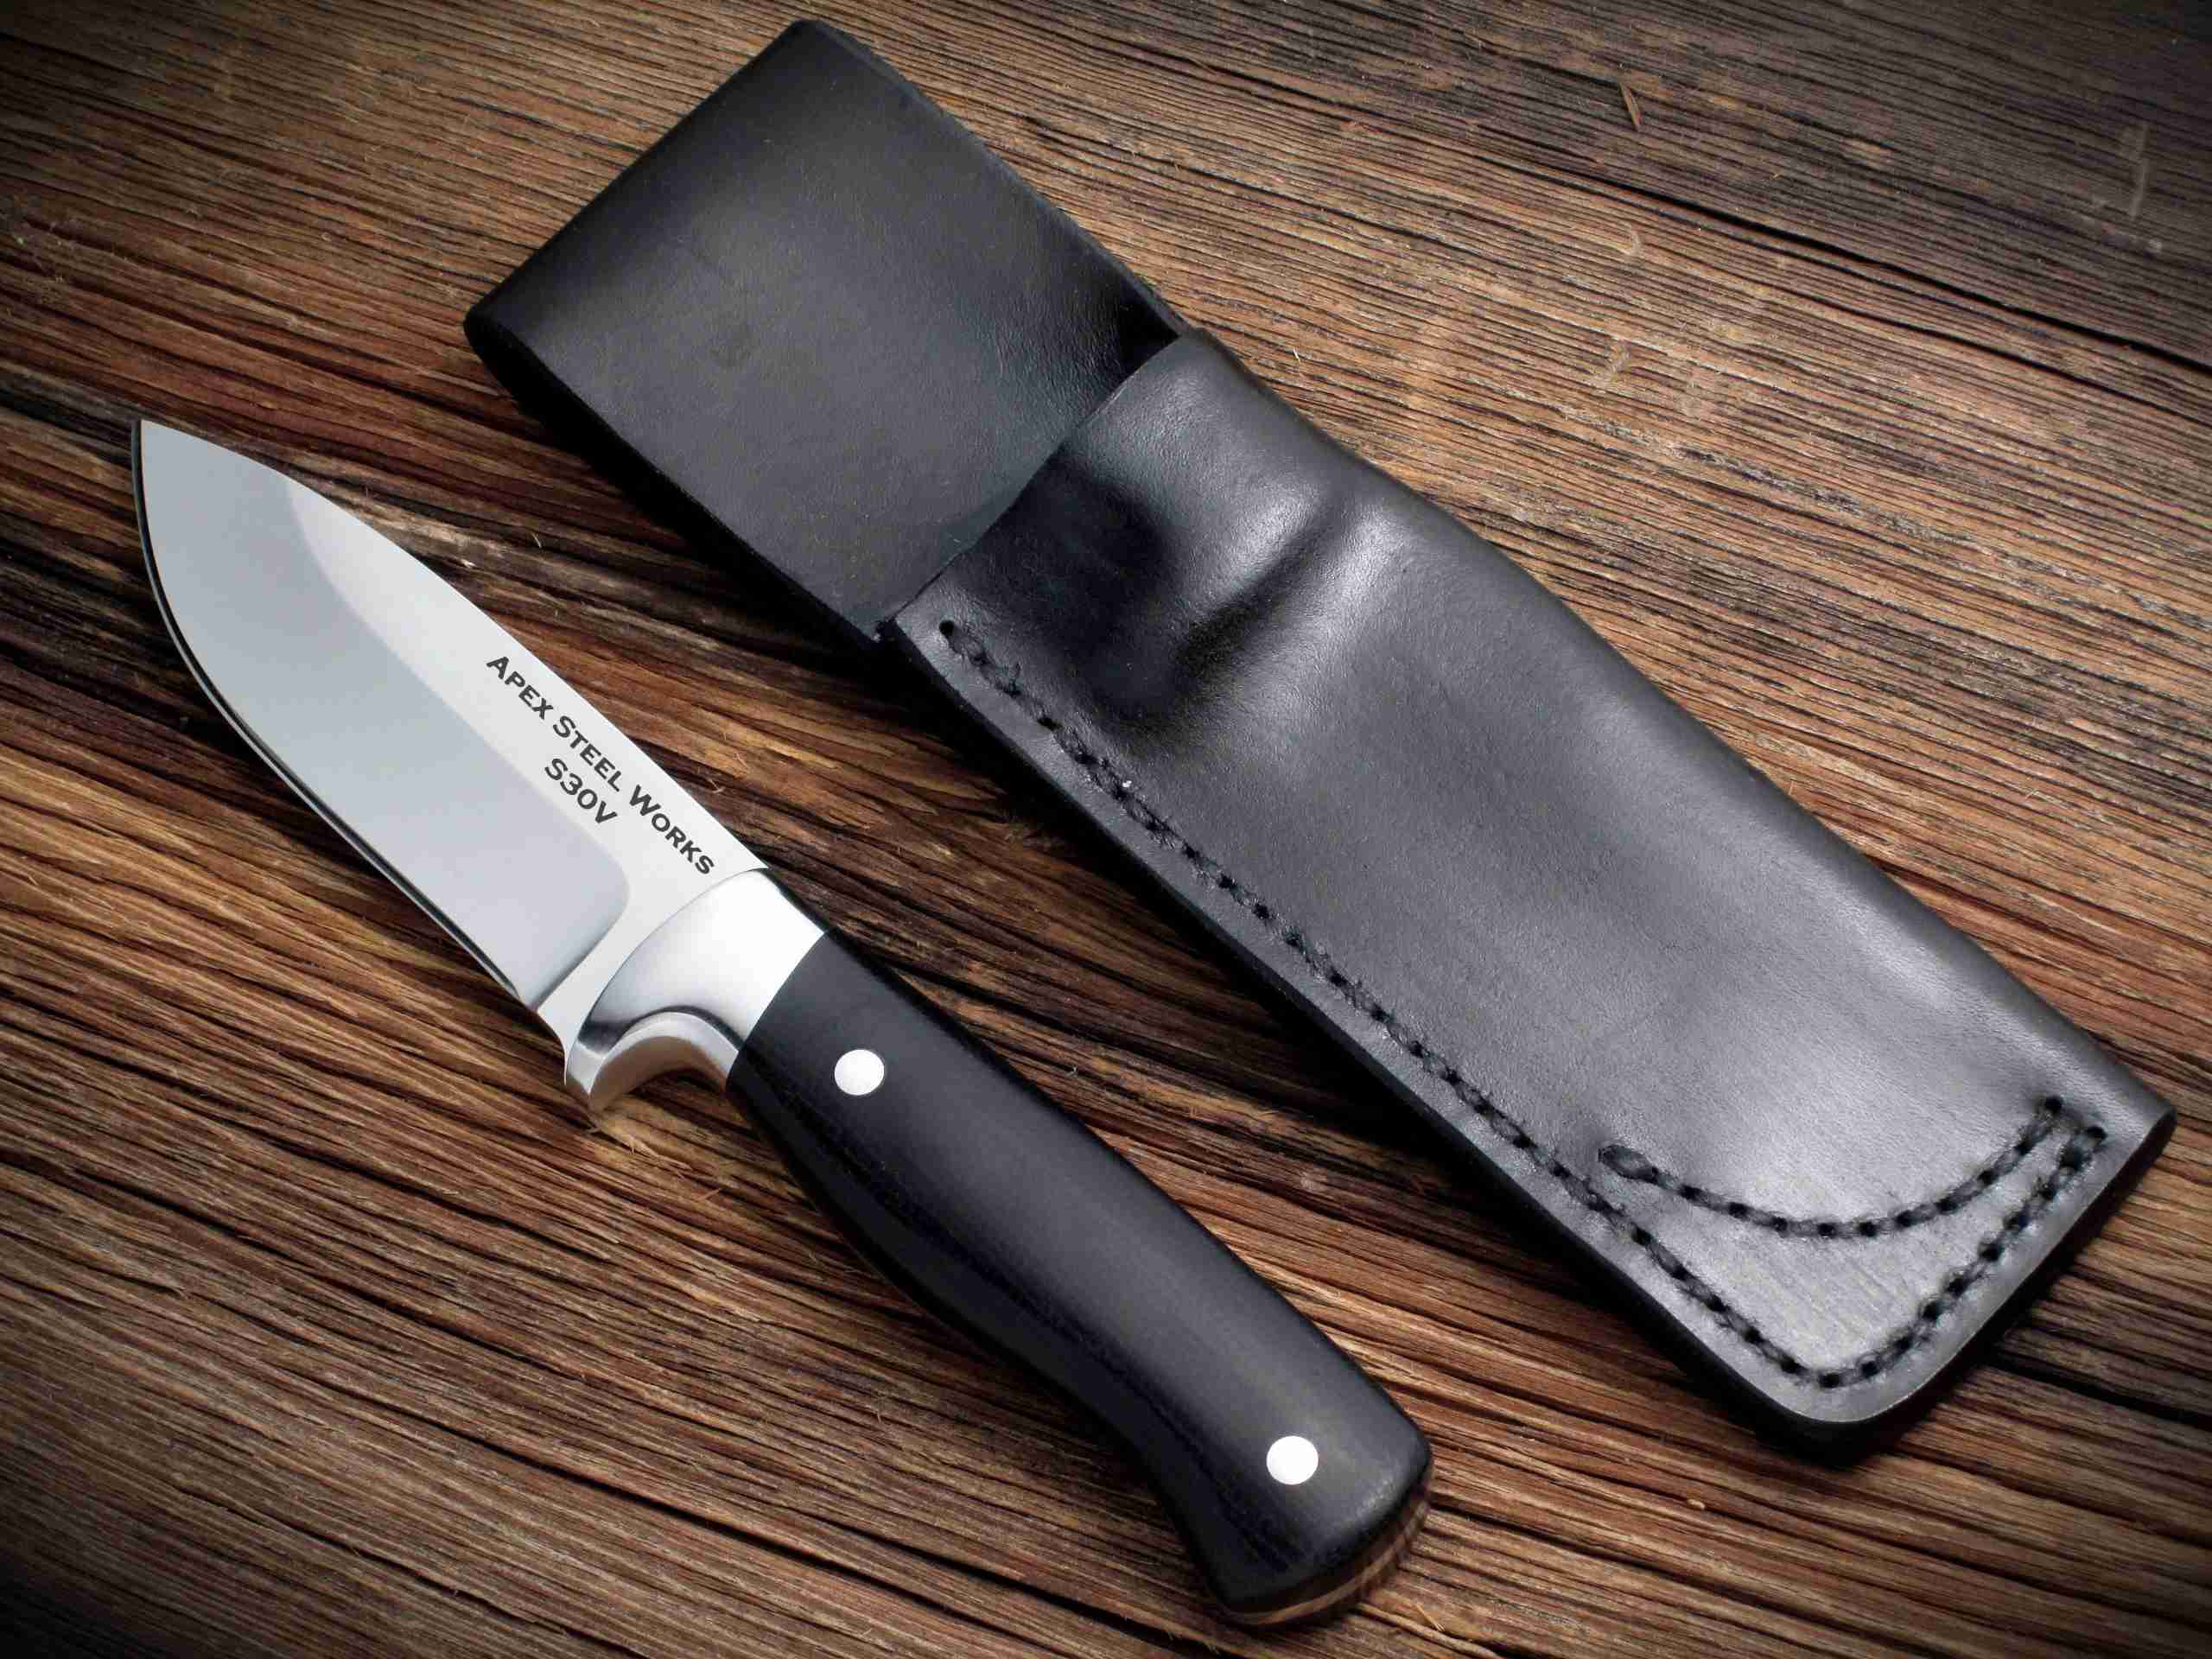 S30V Hunting Knife made by Apex Steel Works with stainless bolsters and CPM S30V blade with black linen micarta handle scales